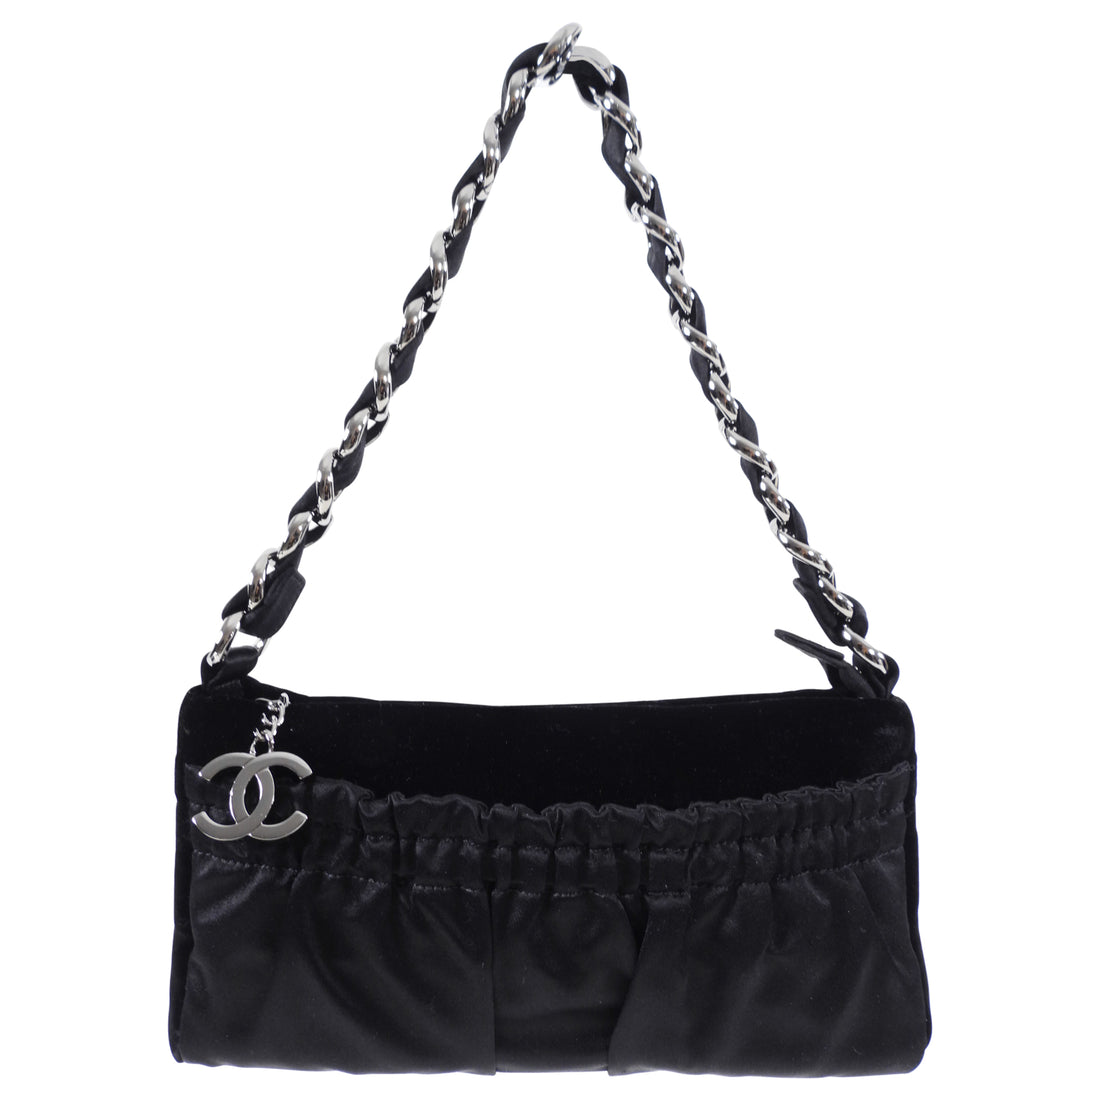 CHANEL CC LOGO BLACK QUILTED SATIN JEWELED CHAIN ROUND EVENING BAG